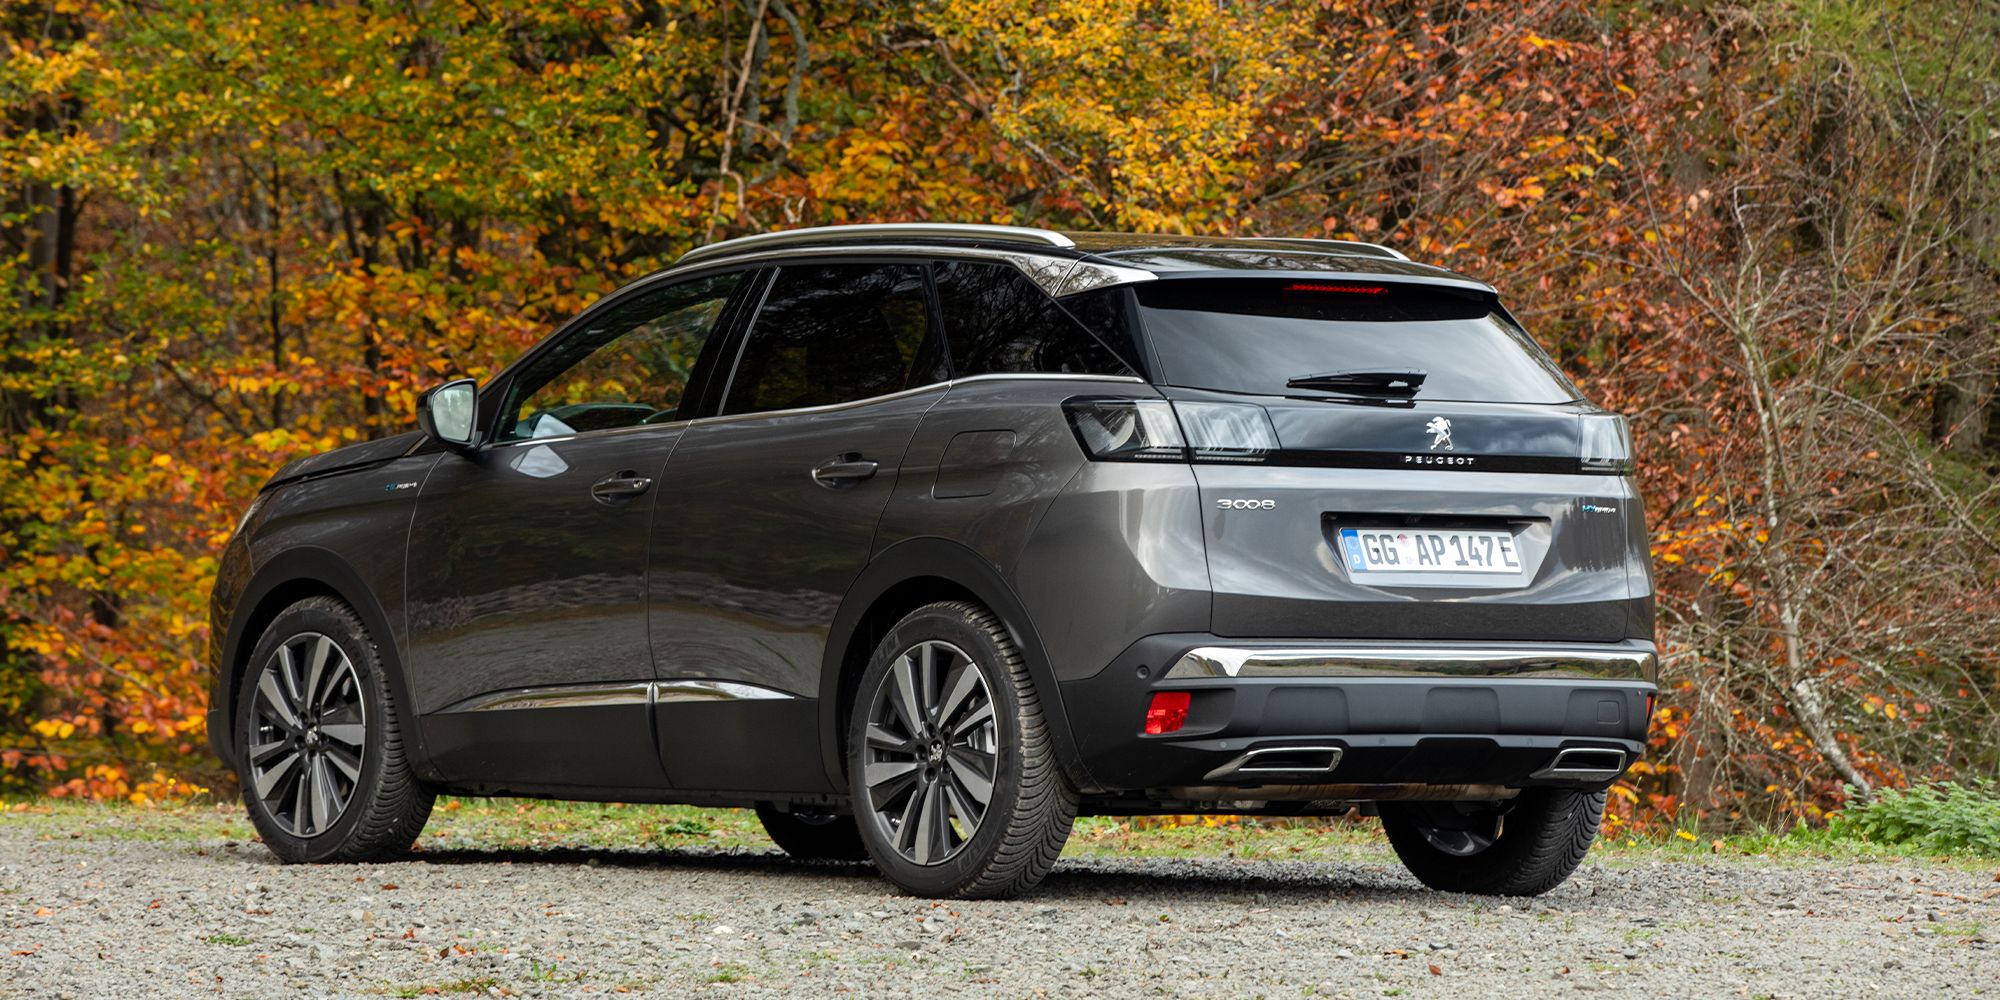 The rear of the Peugeot 3008